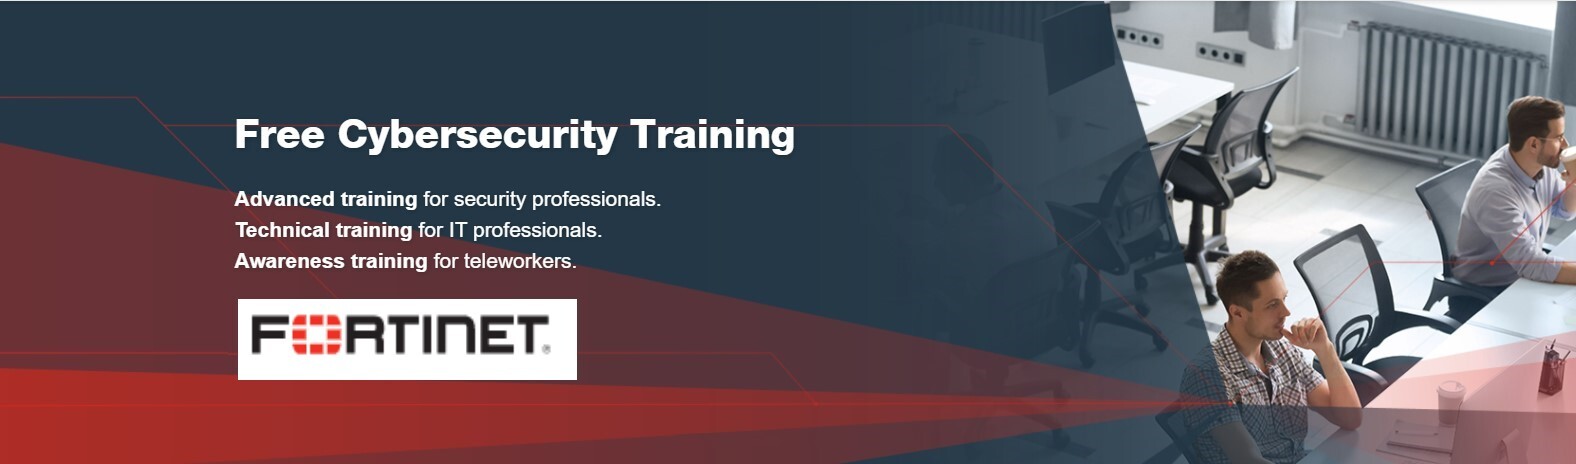 Fortinet Extends Availability of Free Self-Paced NSE Cybersecurity Training Courses to Further Build Industry's Workforce